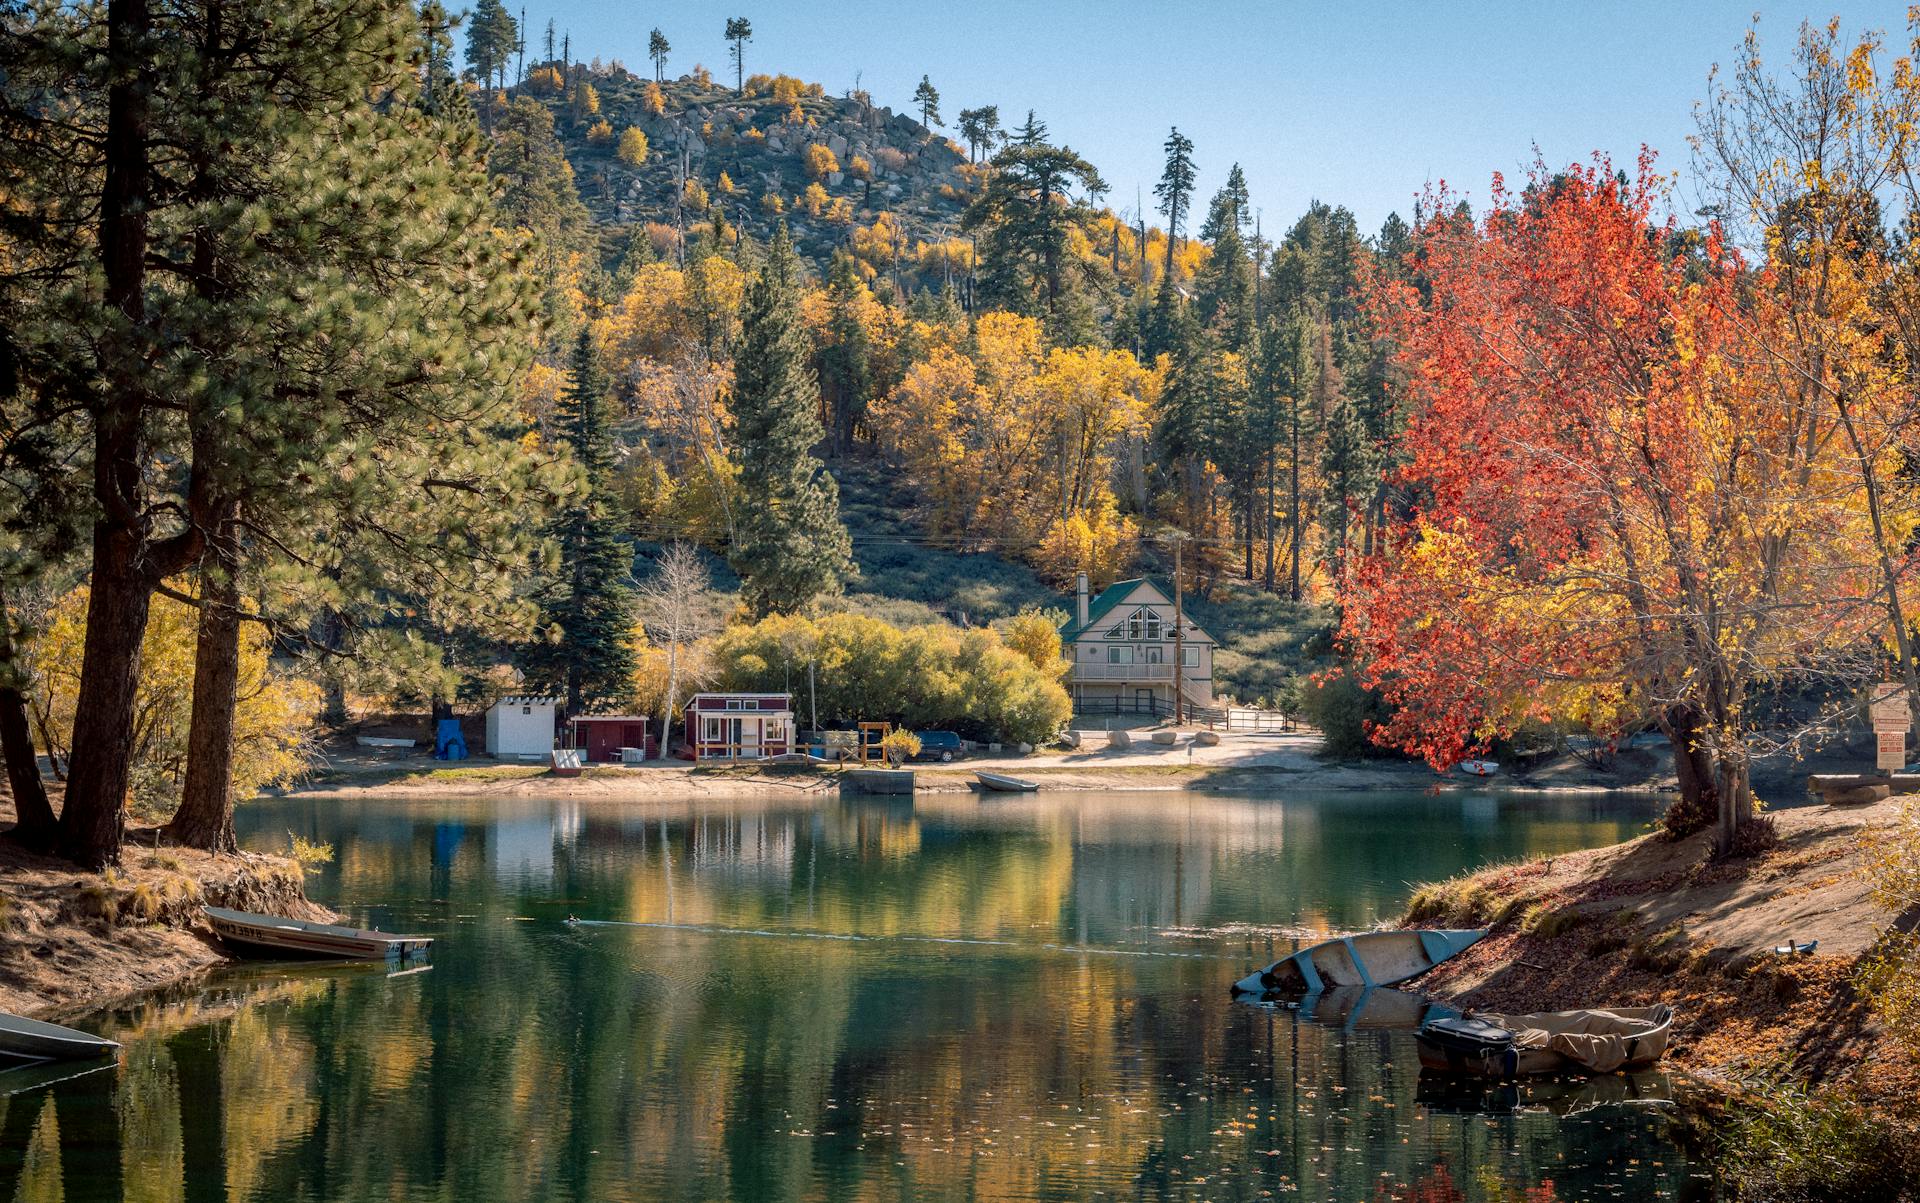 A cabin on a lakeshore | Source: Pexels